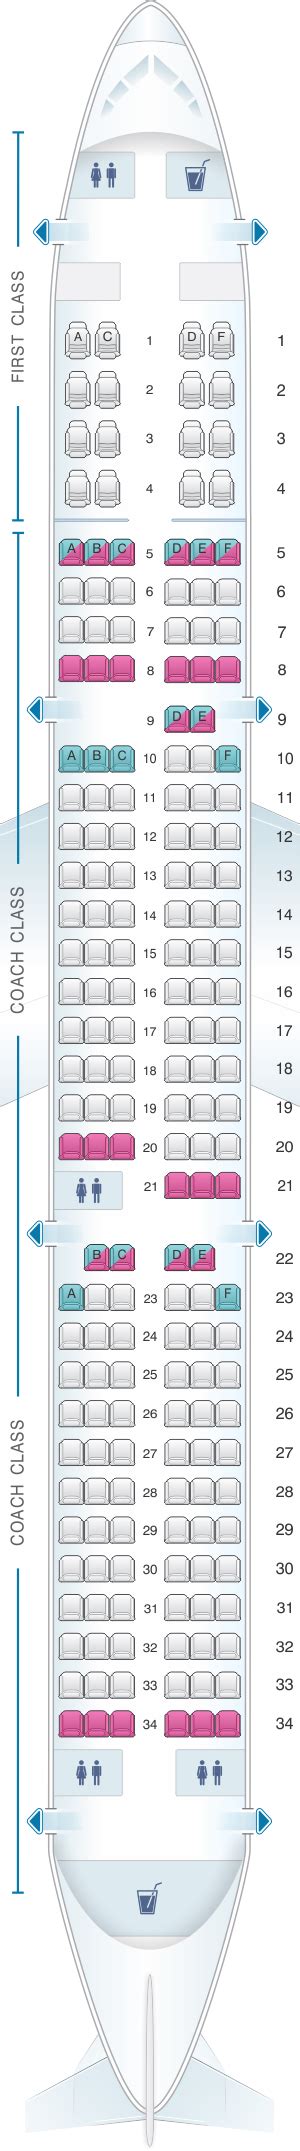 17 thg 6, 2018 ... Delta Air Lines Airbus A321-200 Seating Chart and Class Configuration Details Overview ... Delta Airbus A321-200 accommodate 192 passengers in .... 